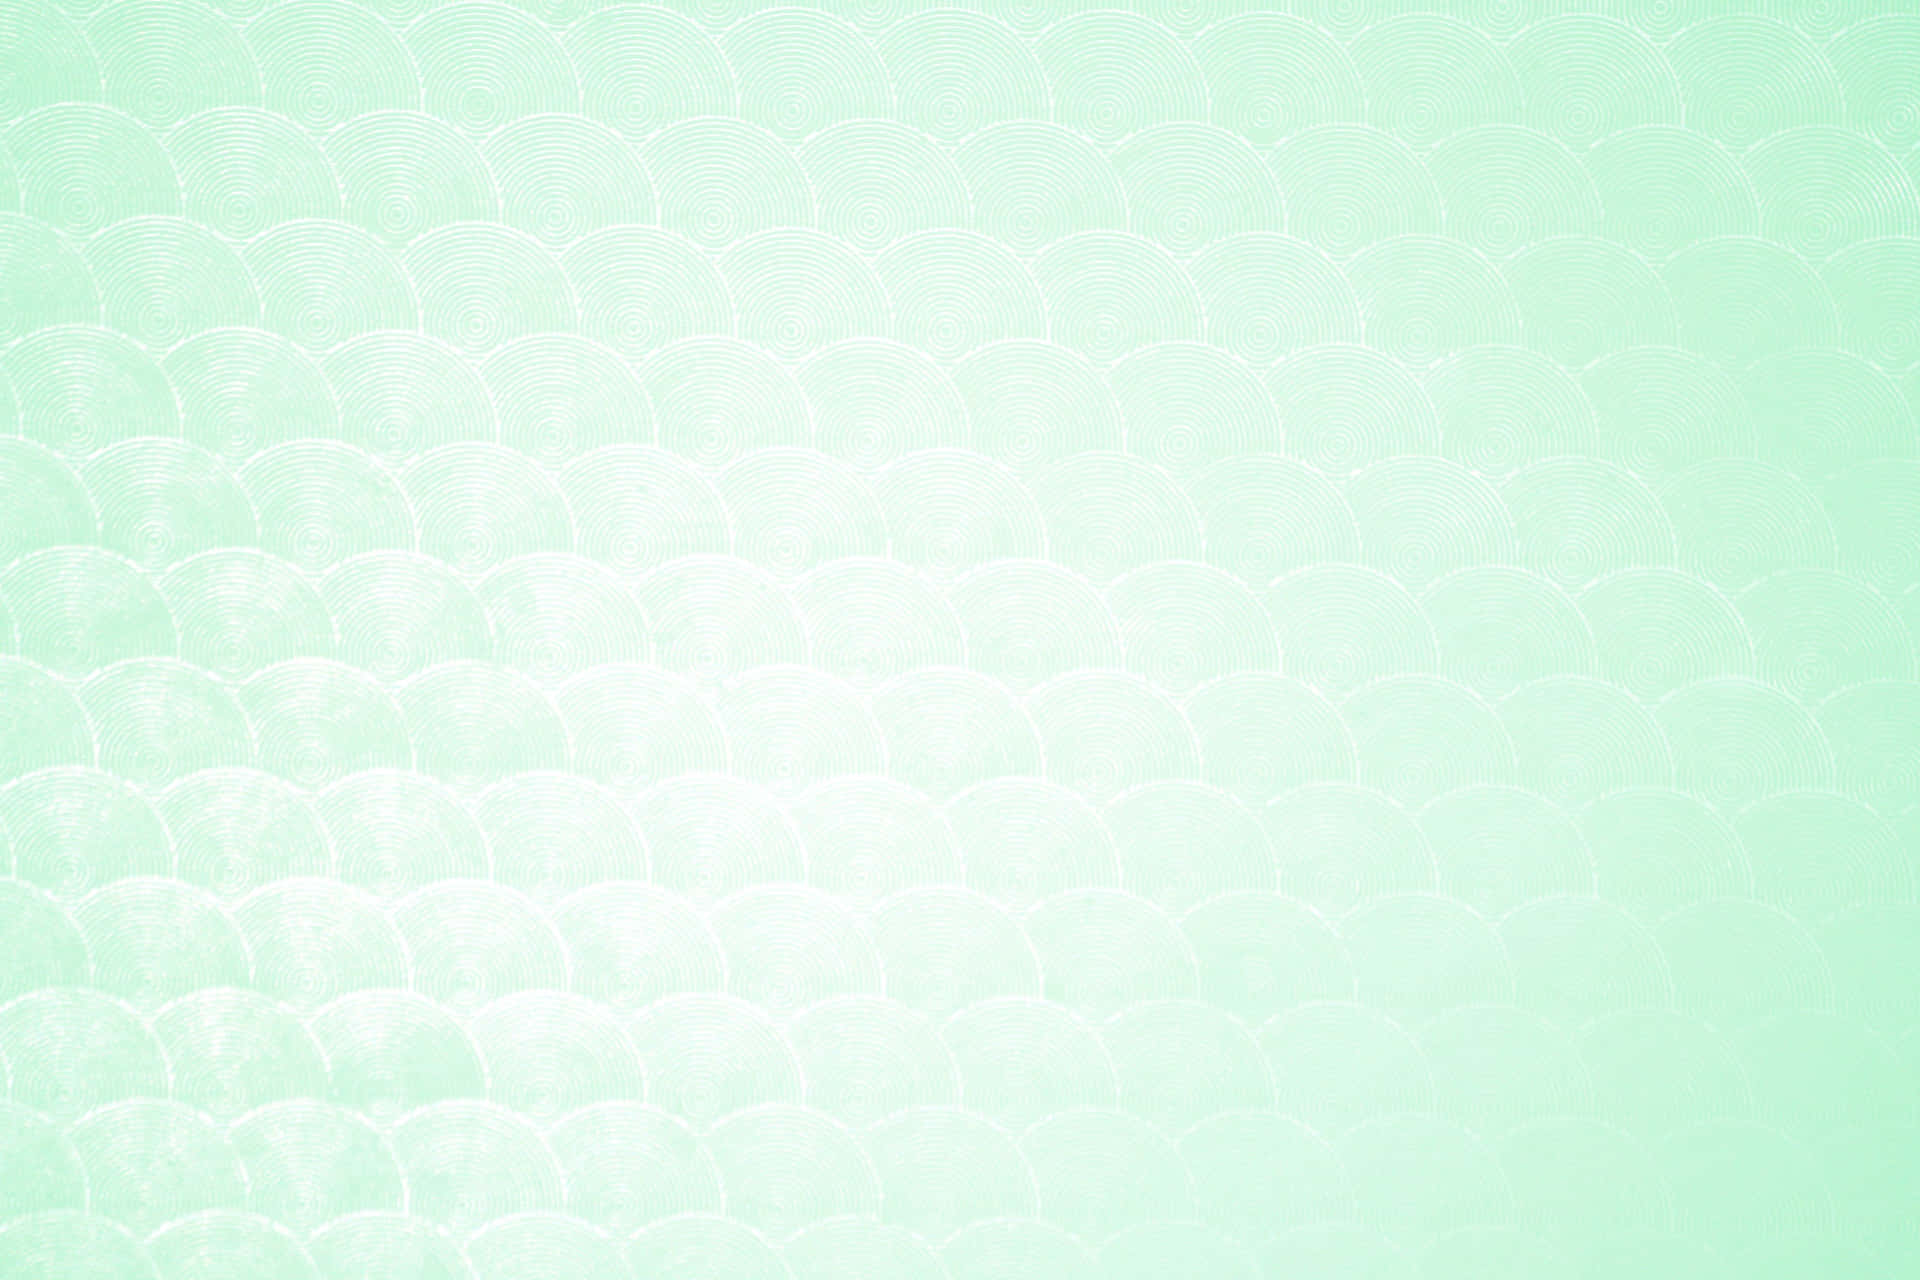 A refreshingly vibrant pattern of mint green and white on a blue background